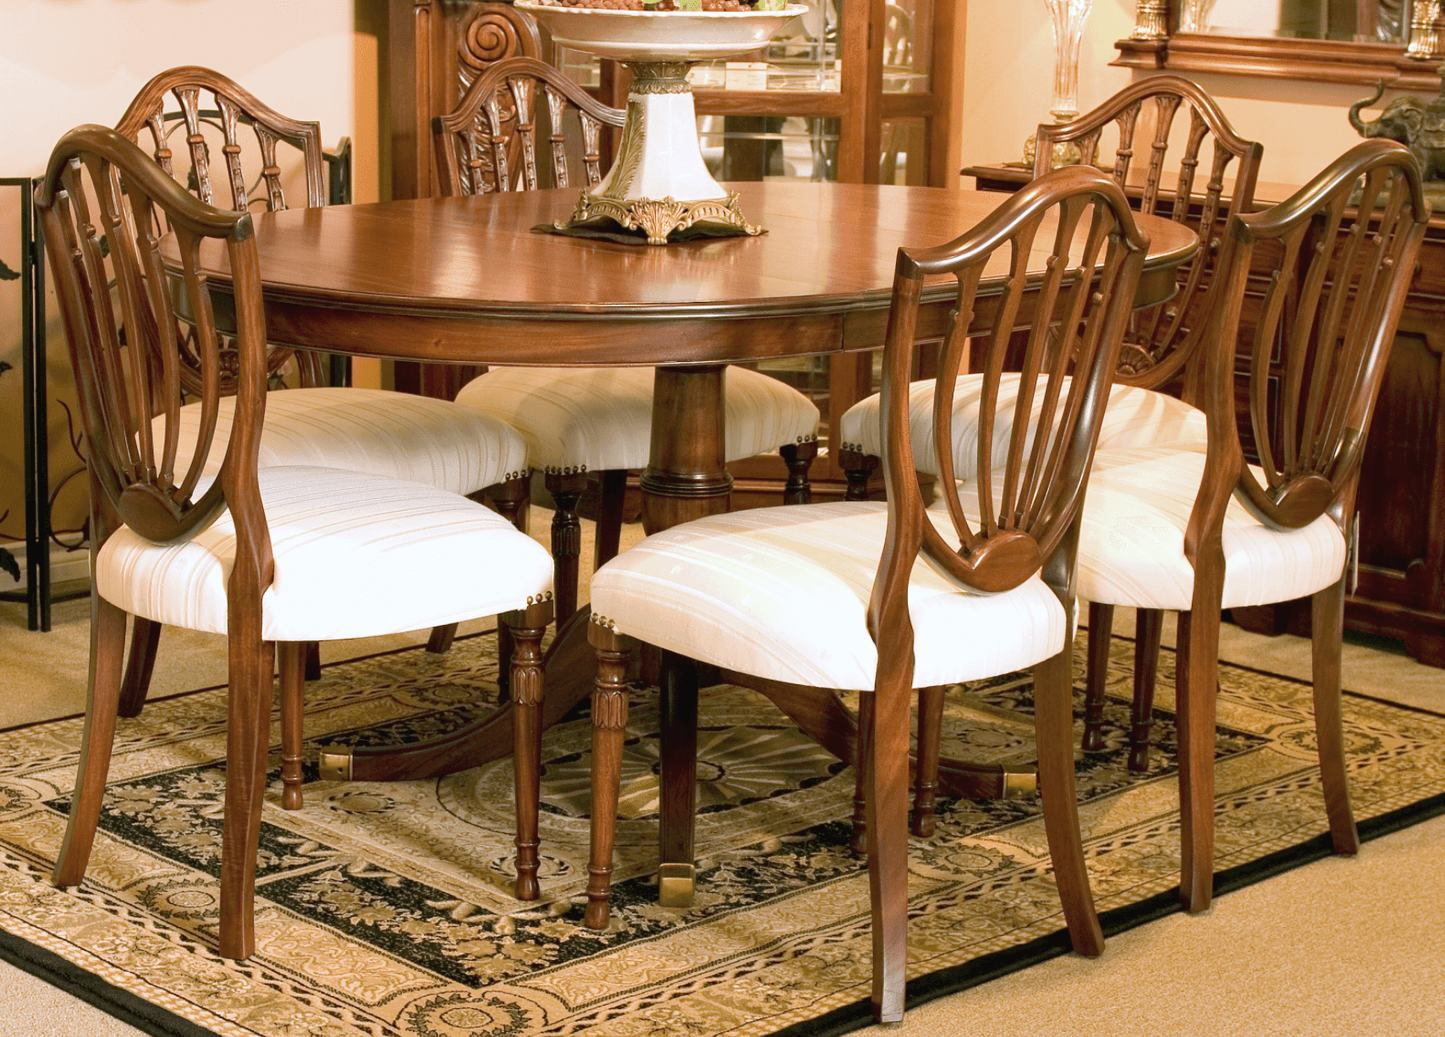 CUSTOM SHERATON STYLE OVAL TABLE WITH CARVED EDGE - House of Chippendale